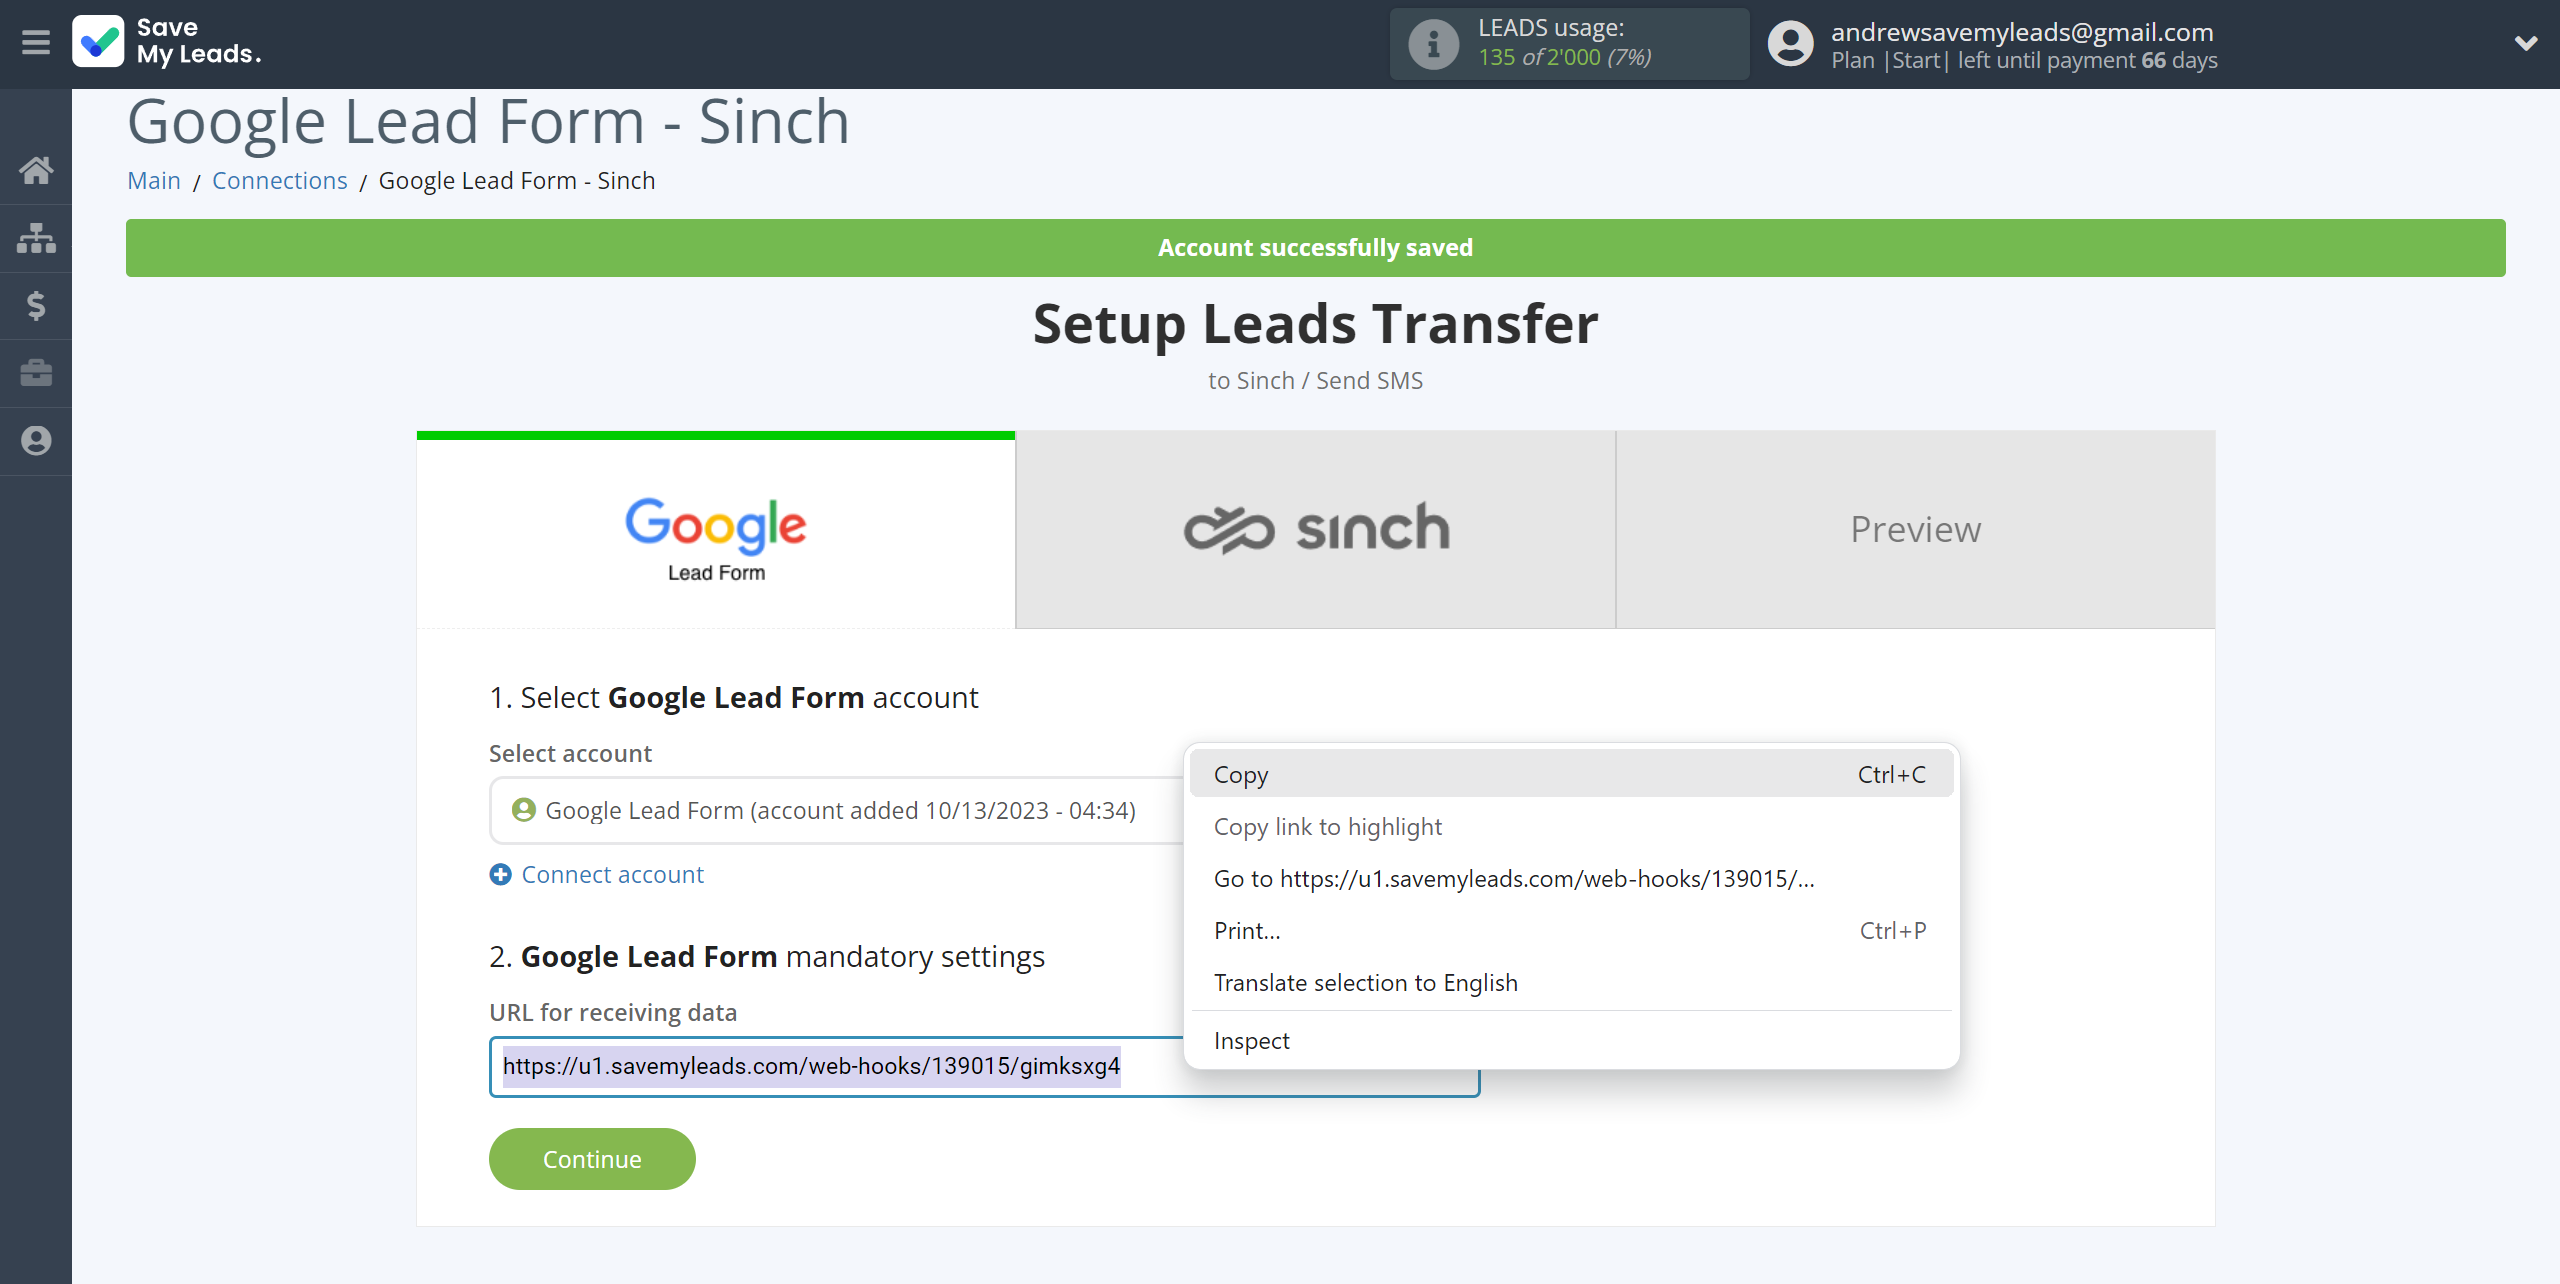 How to Connect Google Lead Form with Sinch | Data Source account connection